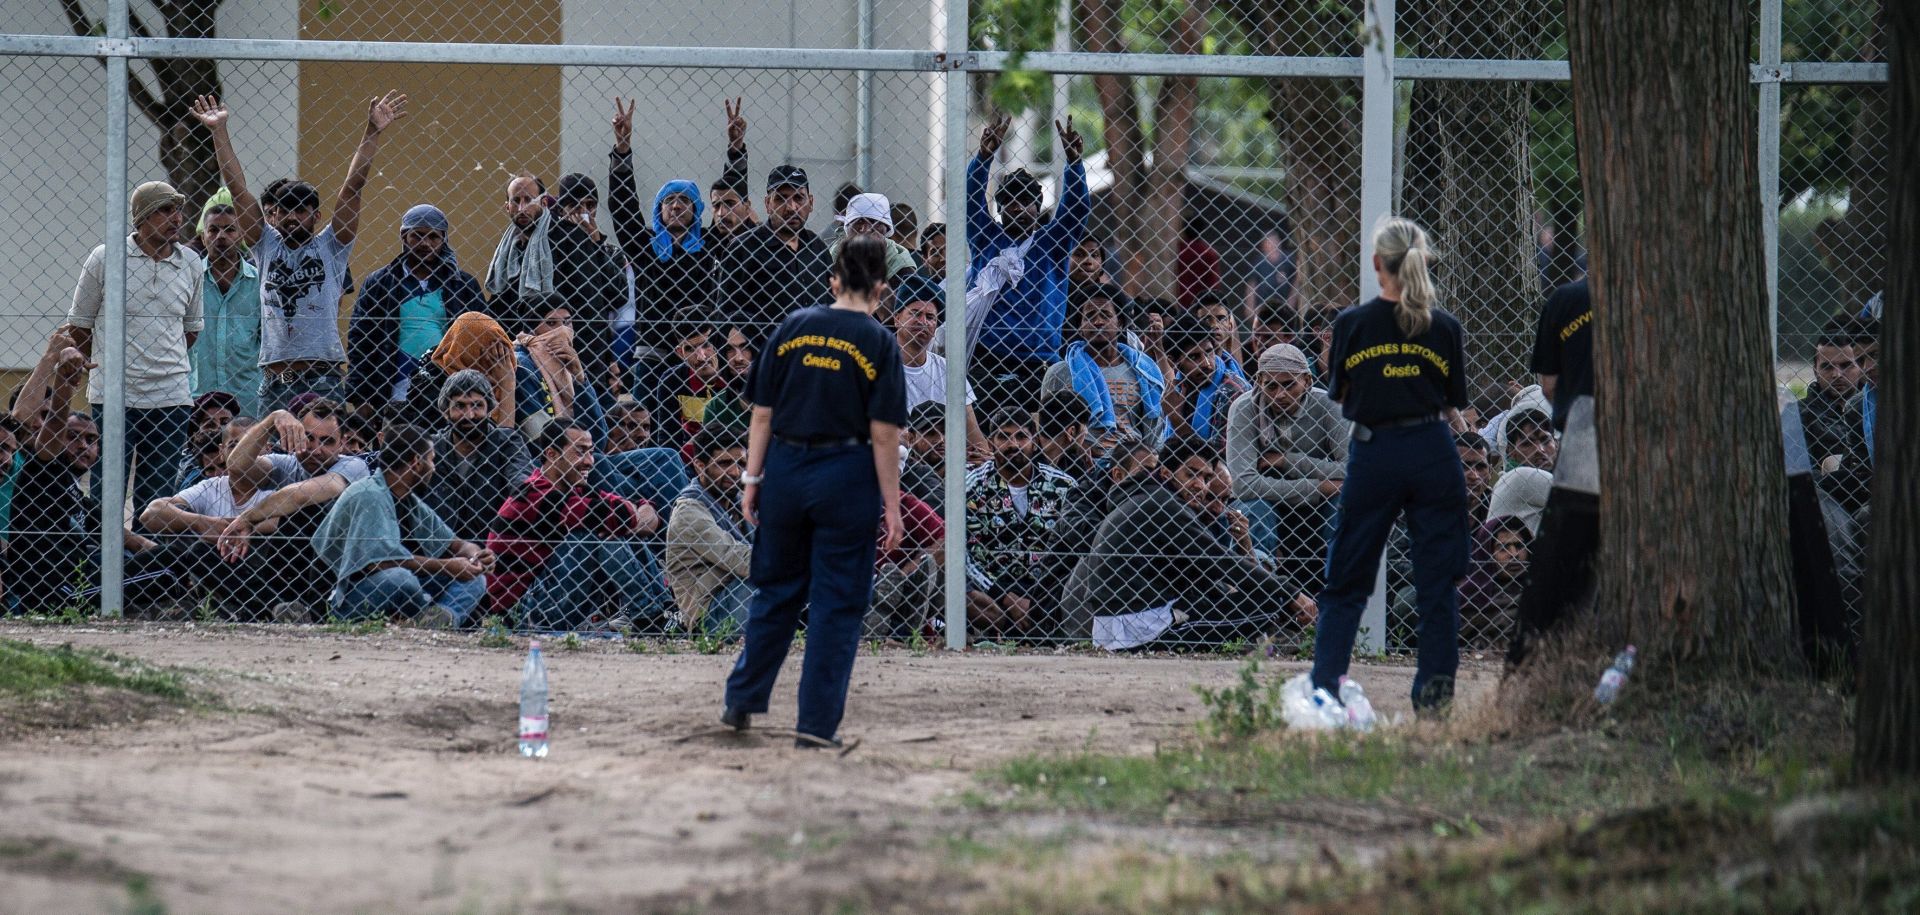 epa05341011 Migrants chant the slogan 'Freedom' as they protest demanding better conditions and faster administrative process deciding about their asylum claim as armed security guards and a Hungarian police officer look on at a closed reception center near the Serbian border in Kiskunhalas, Hungary, 01 June 2016. According to reports, the migrant processing center houses migrants that are to be deported from Hungary.  EPA/SANDOR UJVARI HUNGARY OUT